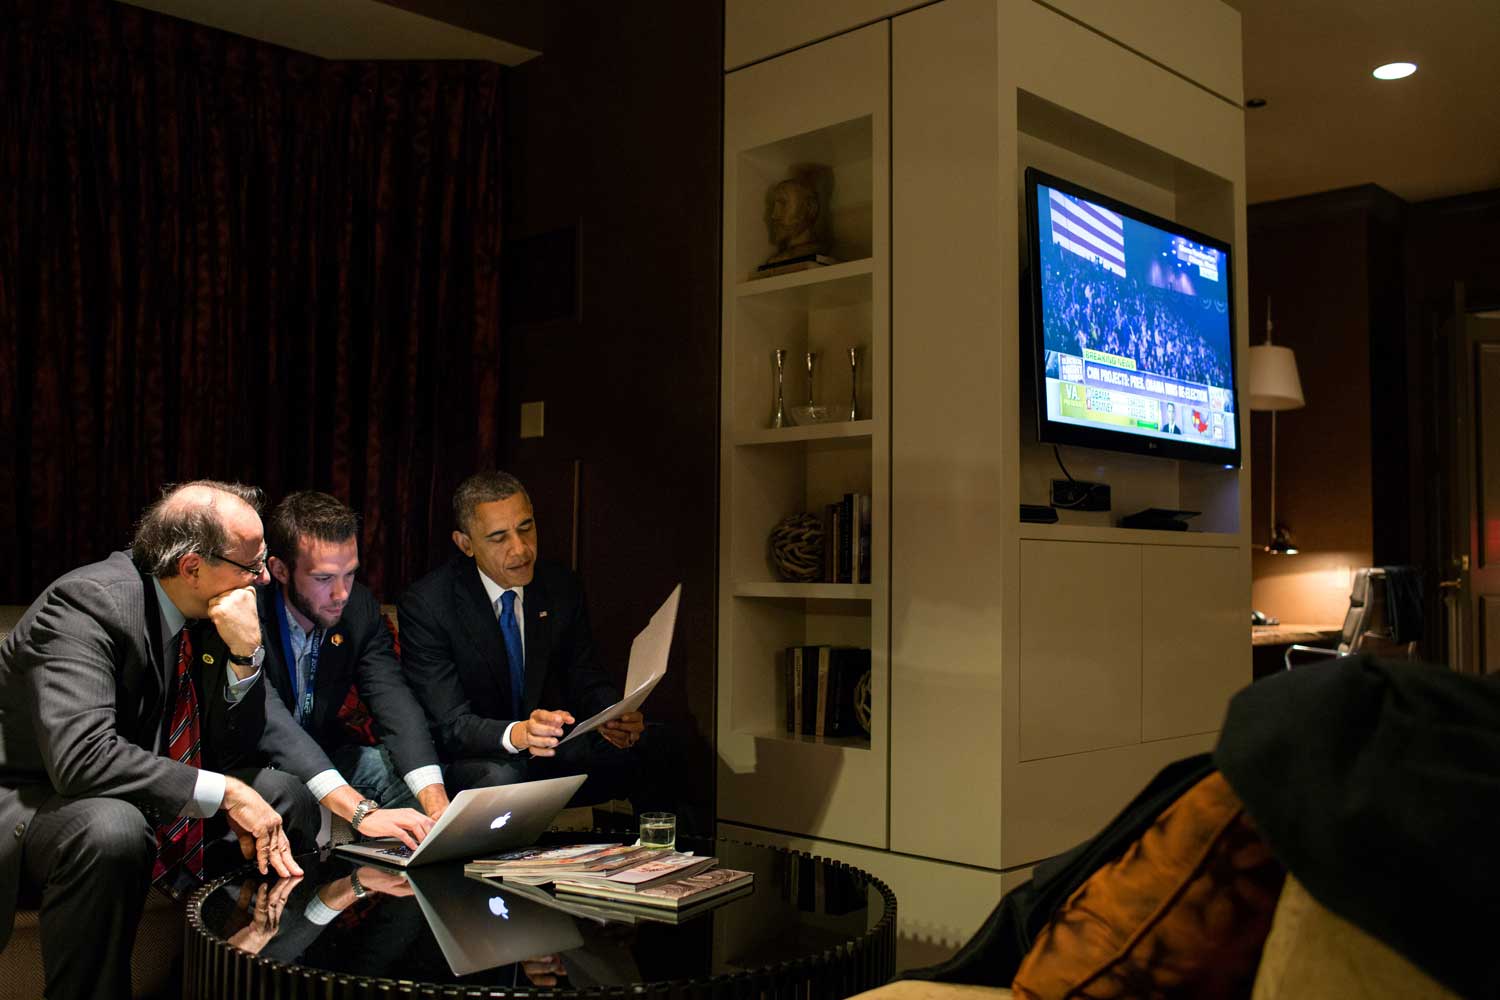 President Barack Obama reviews his election speech with Jon Favreau, Director of Speechwriting, and David Axelrod in the Presidential Suite at the Fairmont Chicago Millennium Park in Chicago, Ill., Nov. 6, 2012.